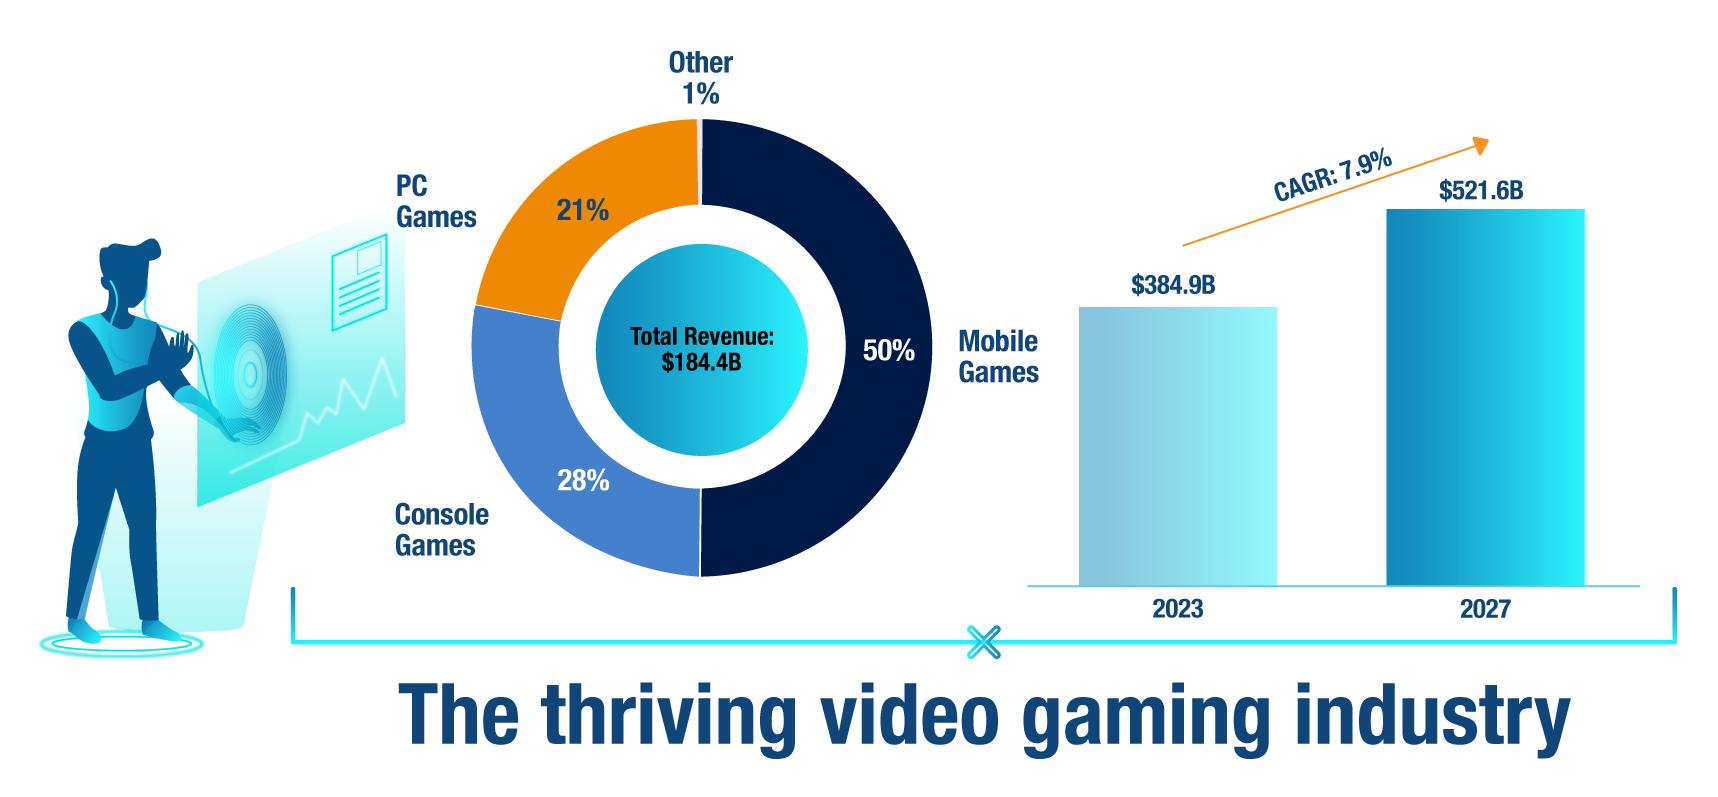 The total revenue breakdown visualized by segment for the global video game market in 2022, along with the forecast for the market growth by 2027.